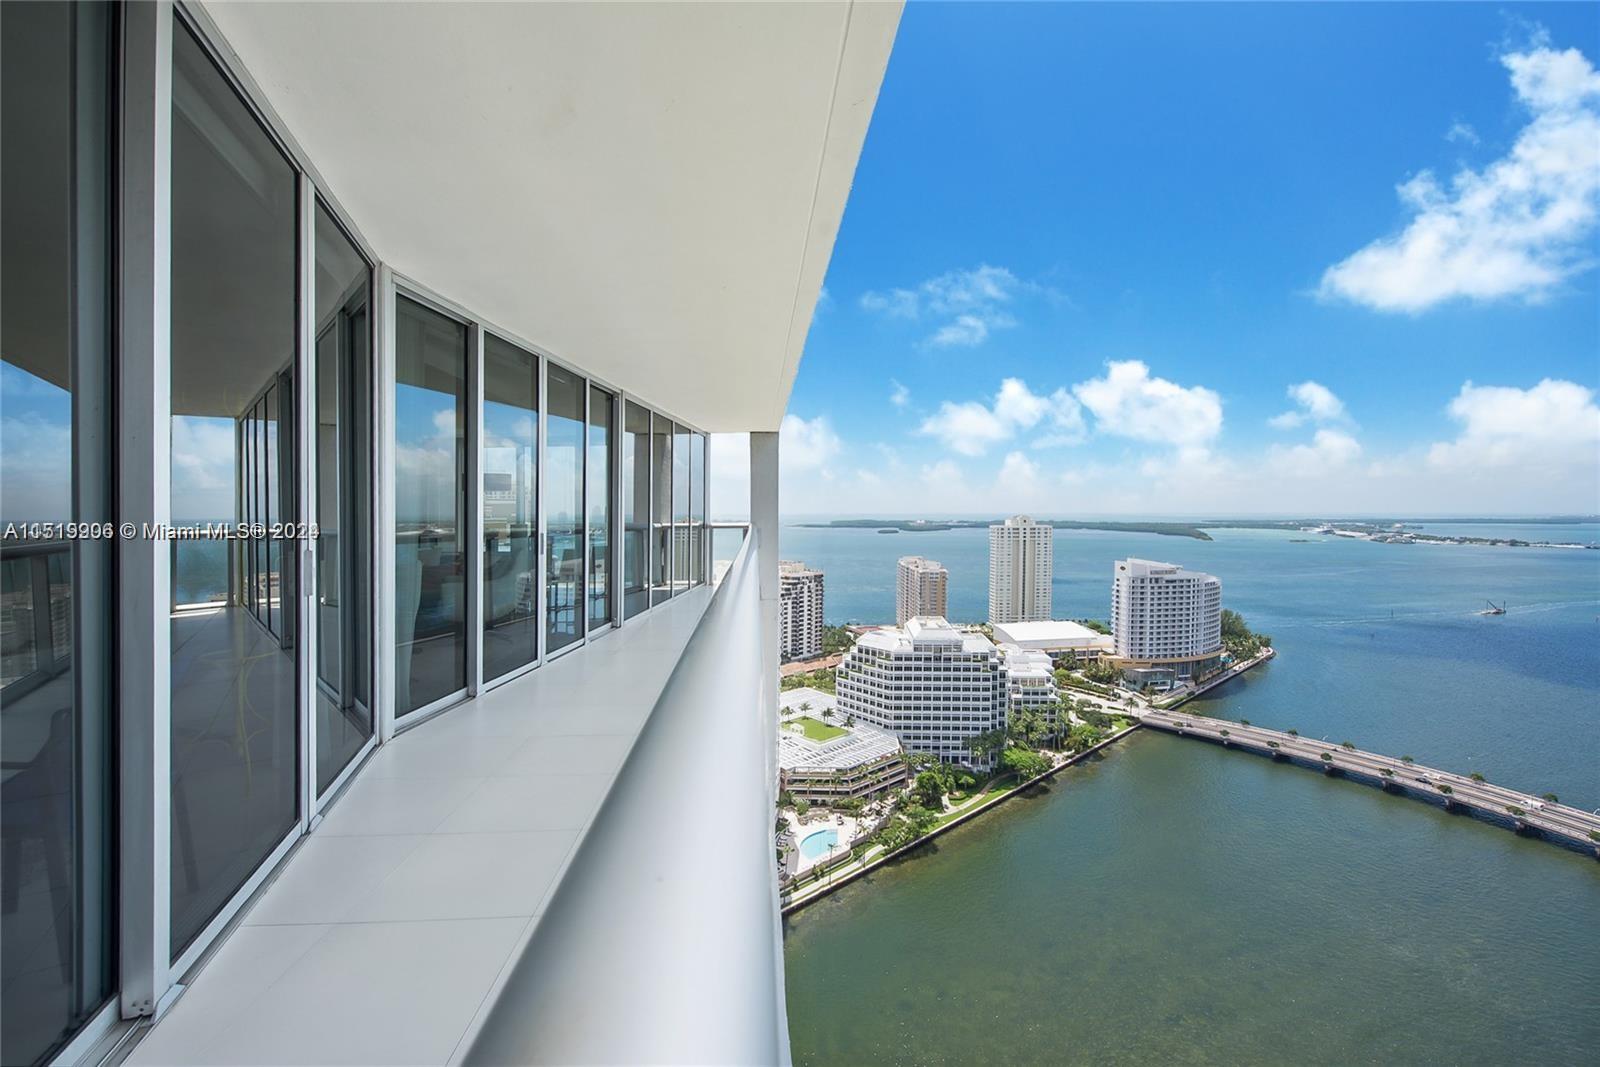 LOCATION & INCREDIBLE VIEWS!  You can walk to all of the great restaurants, bars & special events in Brickell/downtown Miami.  AMENITIES GALORE including infinity pool, fitness center & store,  Cable, Wifi, Internet & water are included in the rent.
Rare opportunity to rent a high story, 3 bedroom/2 bath in the coveted Icon Brickell.  The 01 line is the most desired line with incredible views of Biscayne Bay from the 33rd floor.  This is a designer finished corner residence in Icon Tower 2.  Smart & spacious floor plan, with walls of glass in the living area. Split floor plan with all of the bedrooms having bay views. The Master suite has two closets & balcony access.  This is also a SMART HOME (see more details in the supplemental remarks) The unit is fully furnished for easy move in.